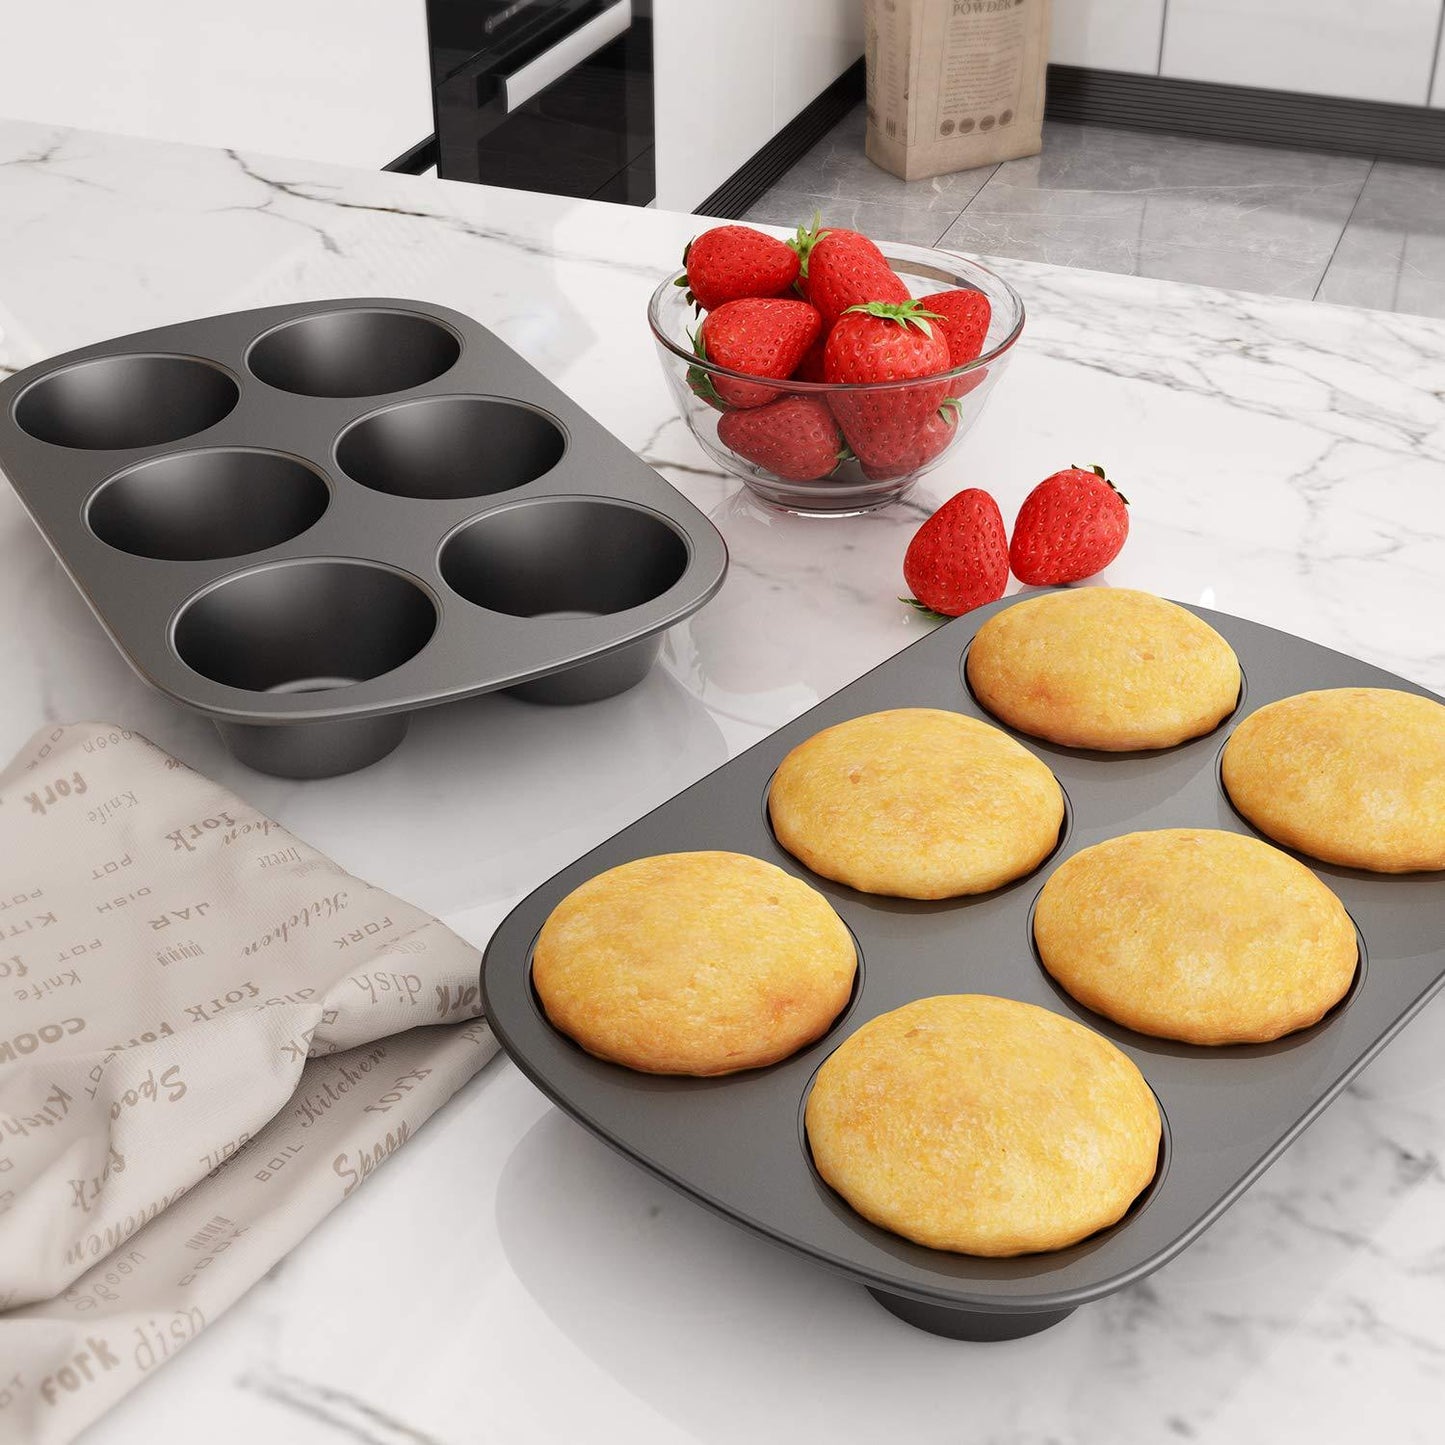 Tiawudi 2 Pack Nonstick Muffin Pan, Carbon Steel Cupcake Pan, 6 Cup, Easy to Clean and Perfect for Making Muffins or Cupcakes, Jumbo - CookCave